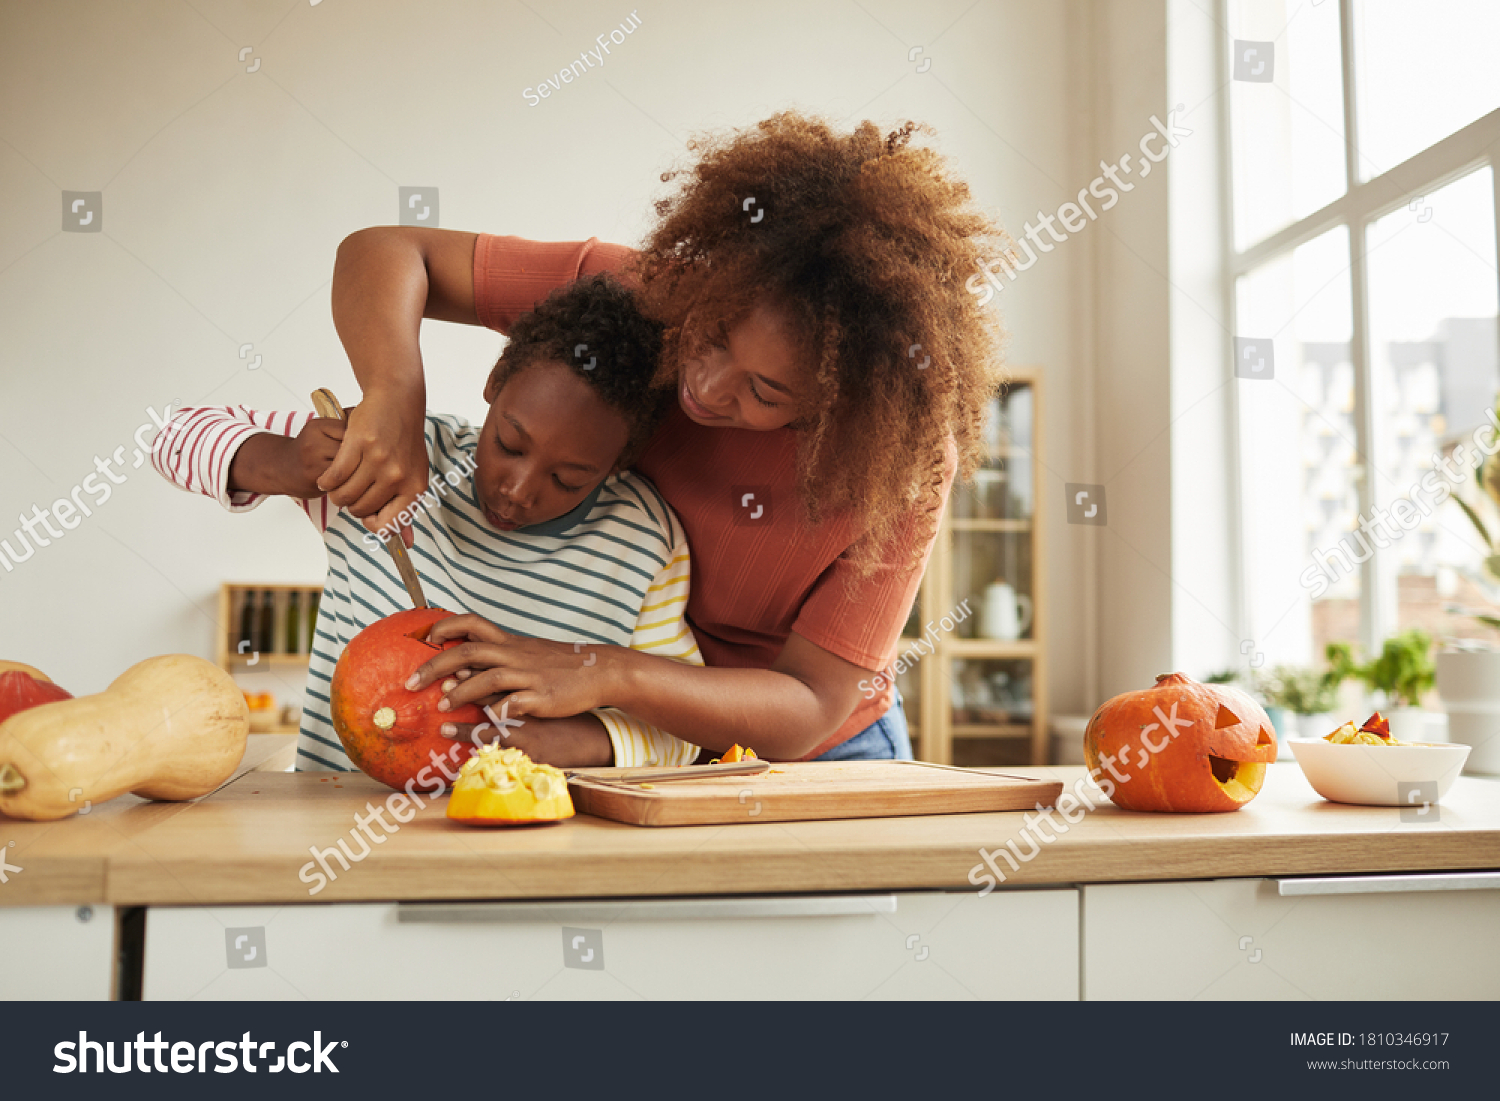 Stylish African American woman spending time with her son standing at table carving pumpkin for Halloween with kitchen knife together #1810346917